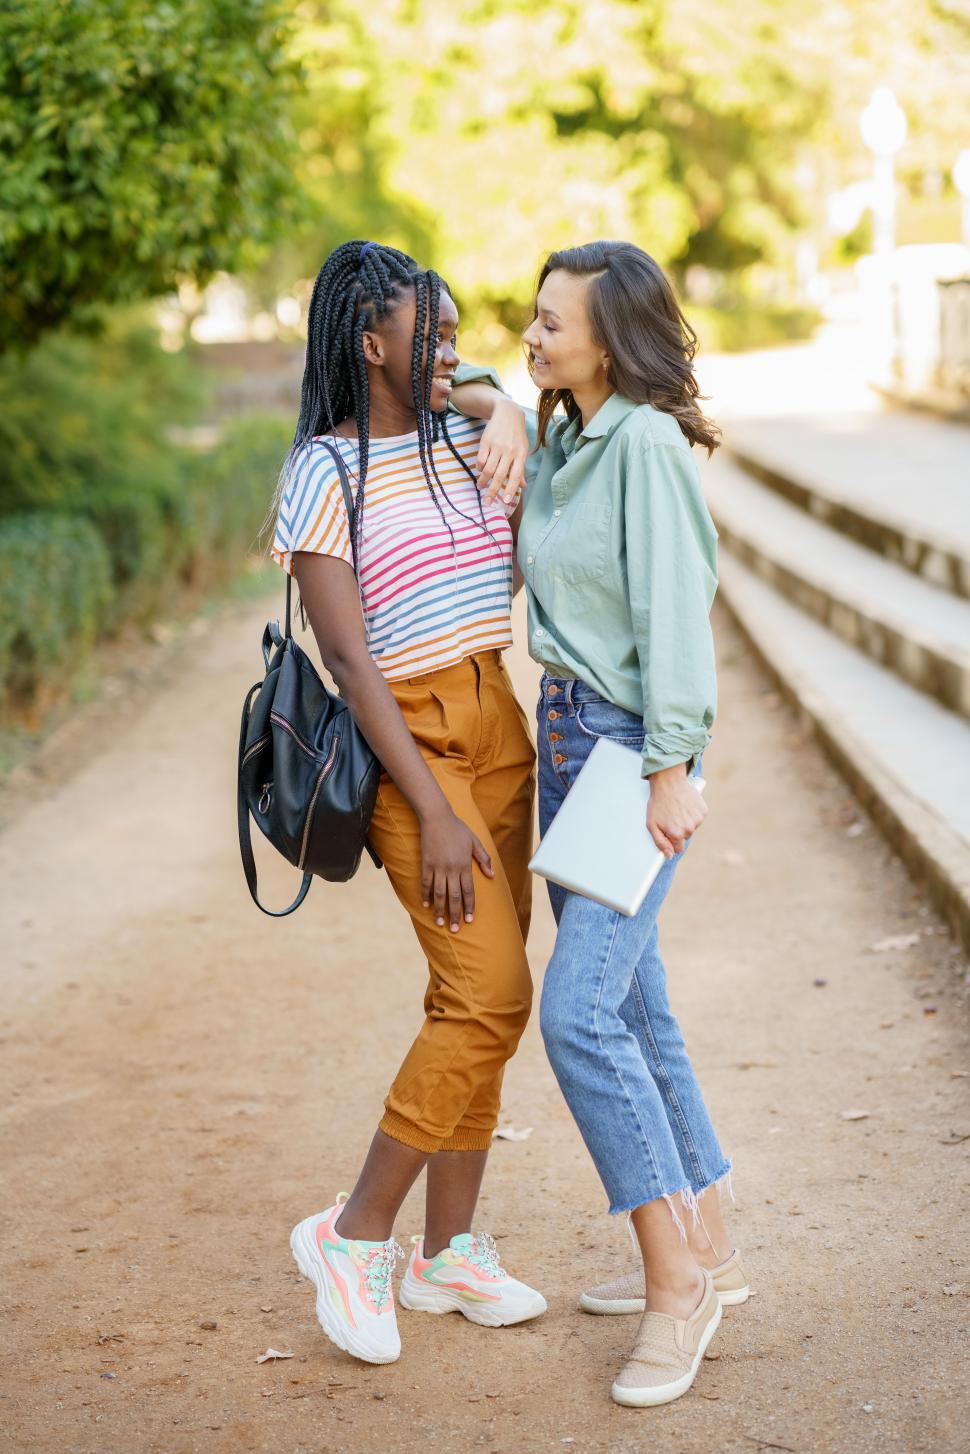 Free Image of Two multiethnic women posing together with colorful casual clothing 